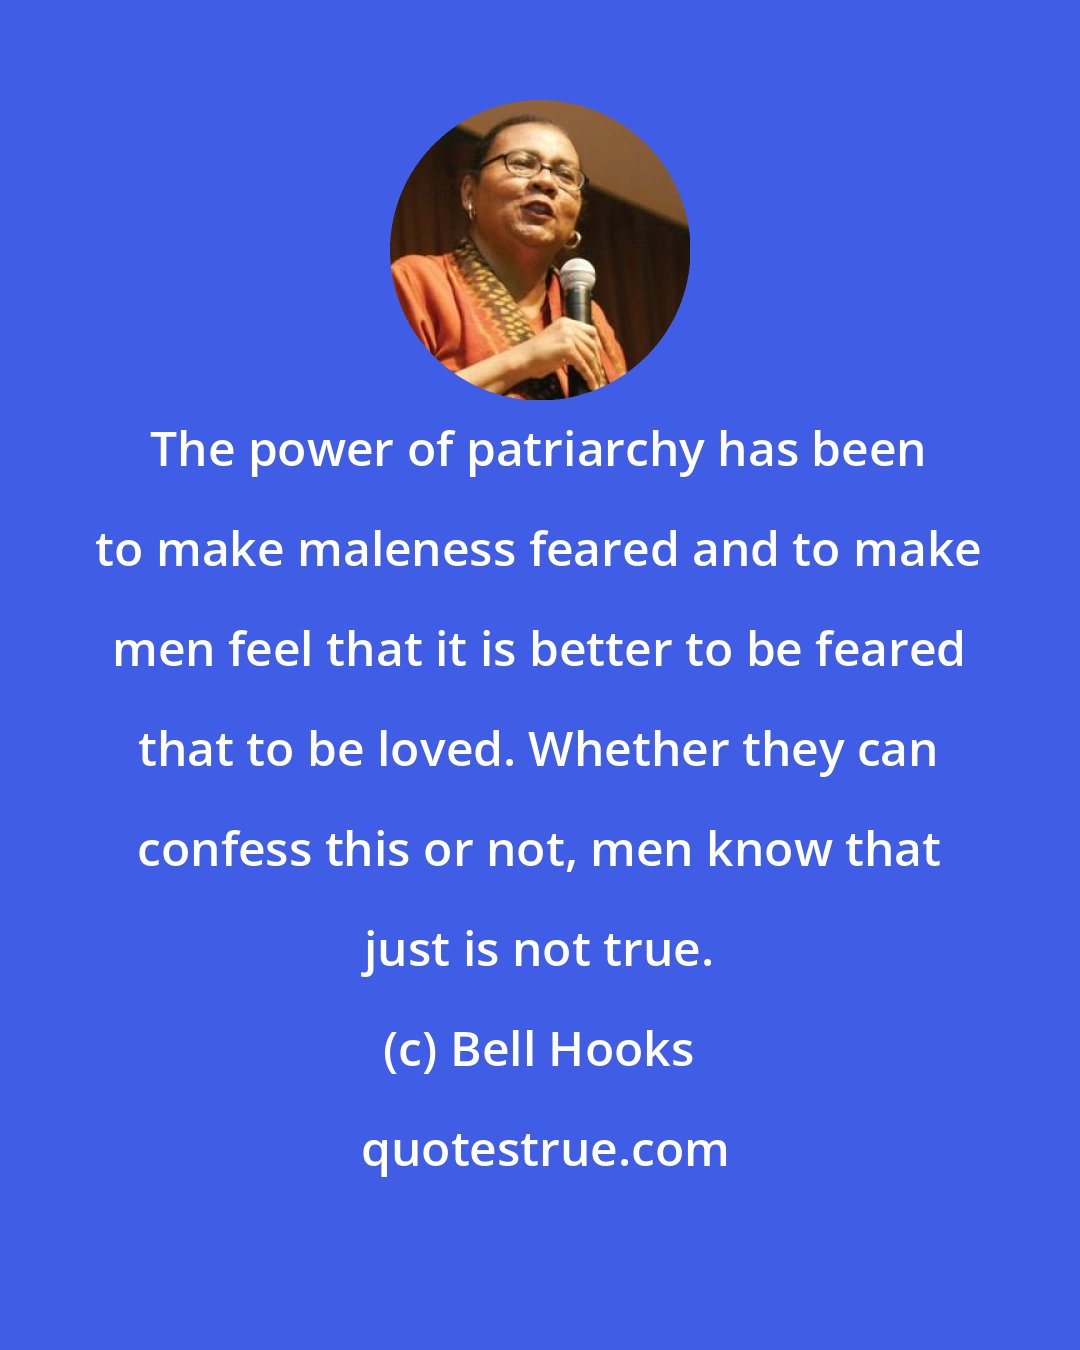 Bell Hooks: The power of patriarchy has been to make maleness feared and to make men feel that it is better to be feared that to be loved. Whether they can confess this or not, men know that just is not true.